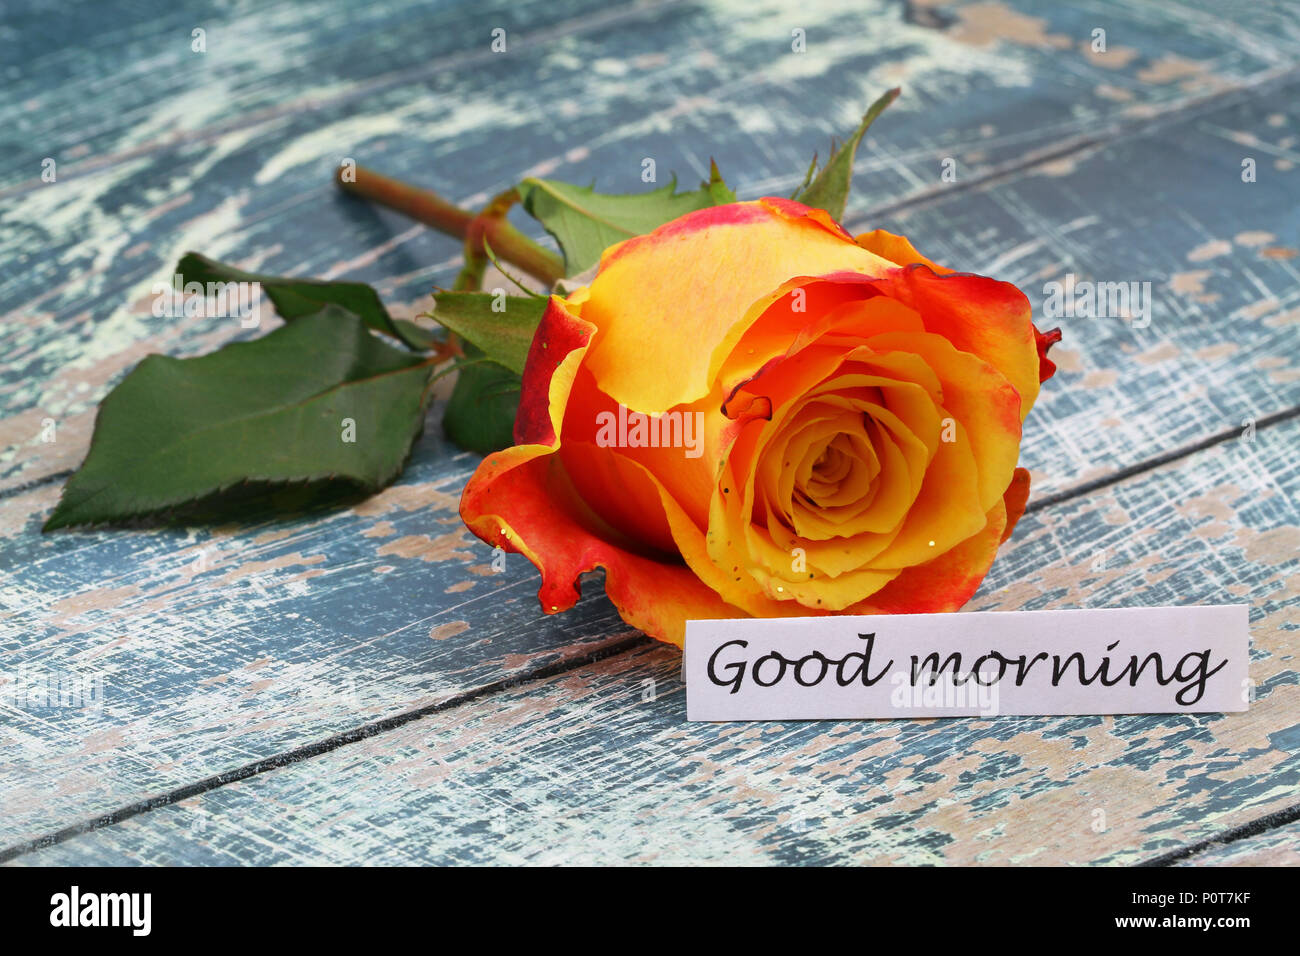 Good morning card with one colorful rose on rustic wooden surface Stock Photo